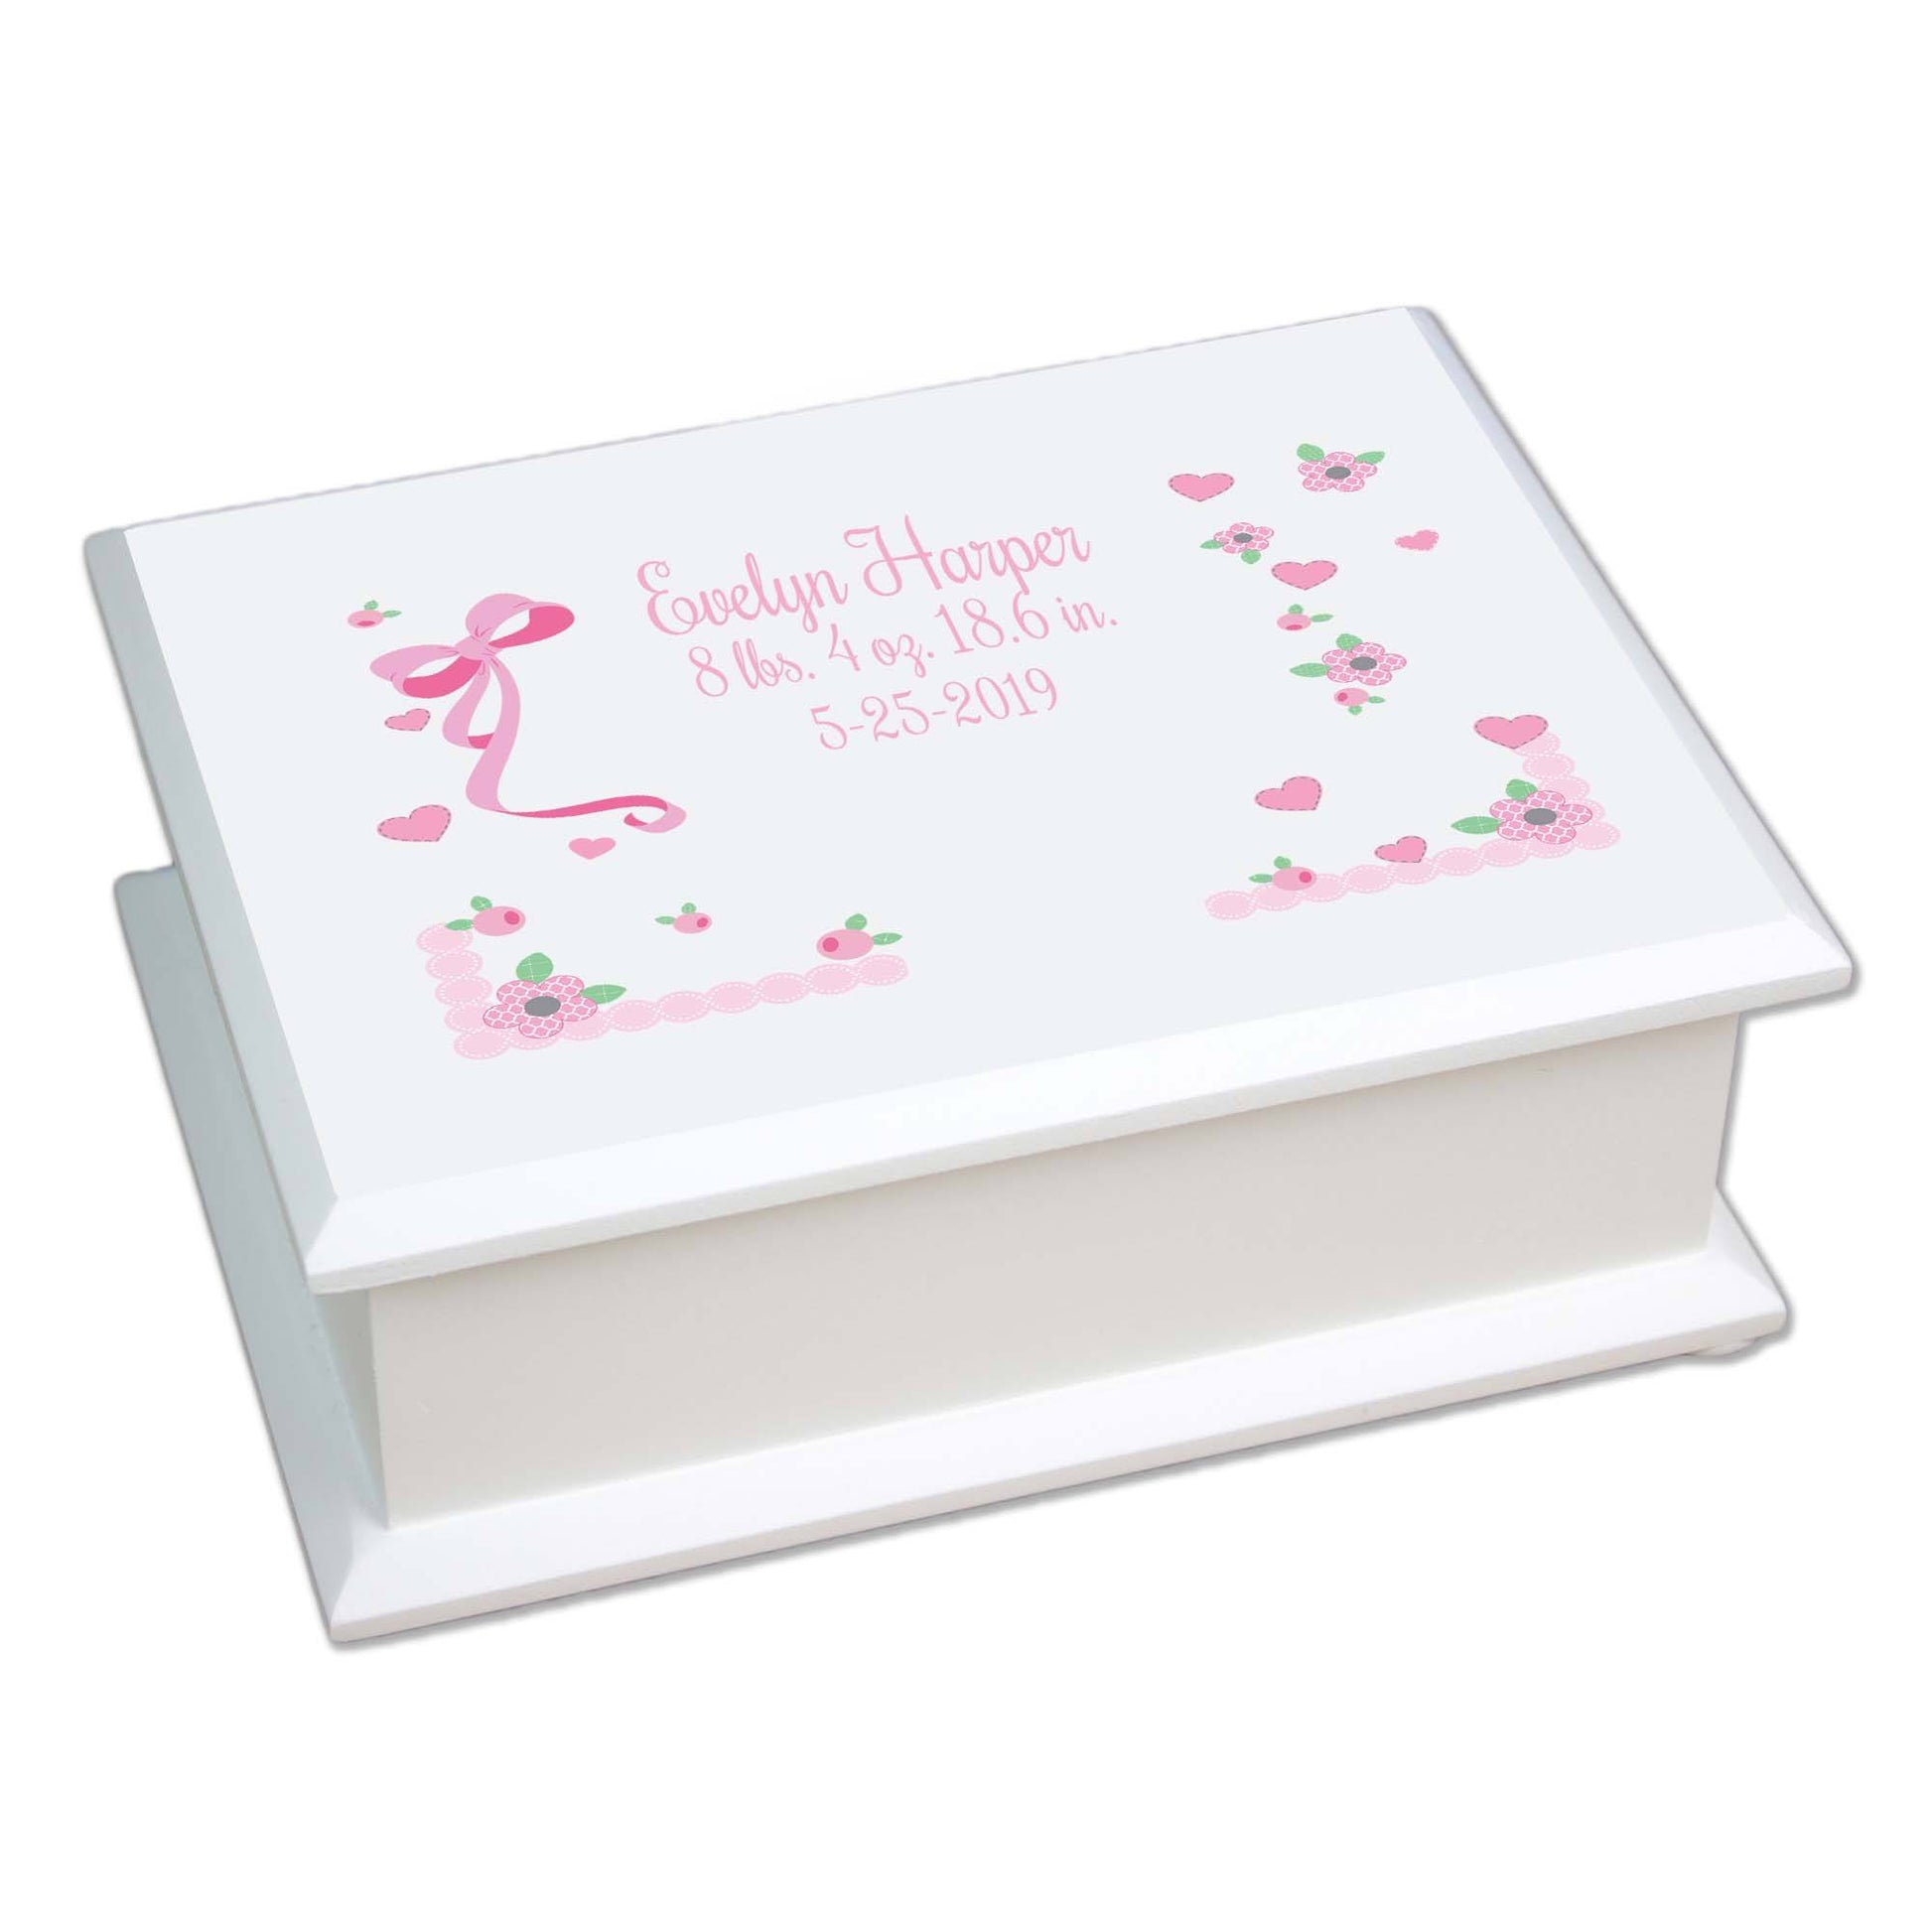 Personalized Lift Top Jewelry Box with Pink Bow design